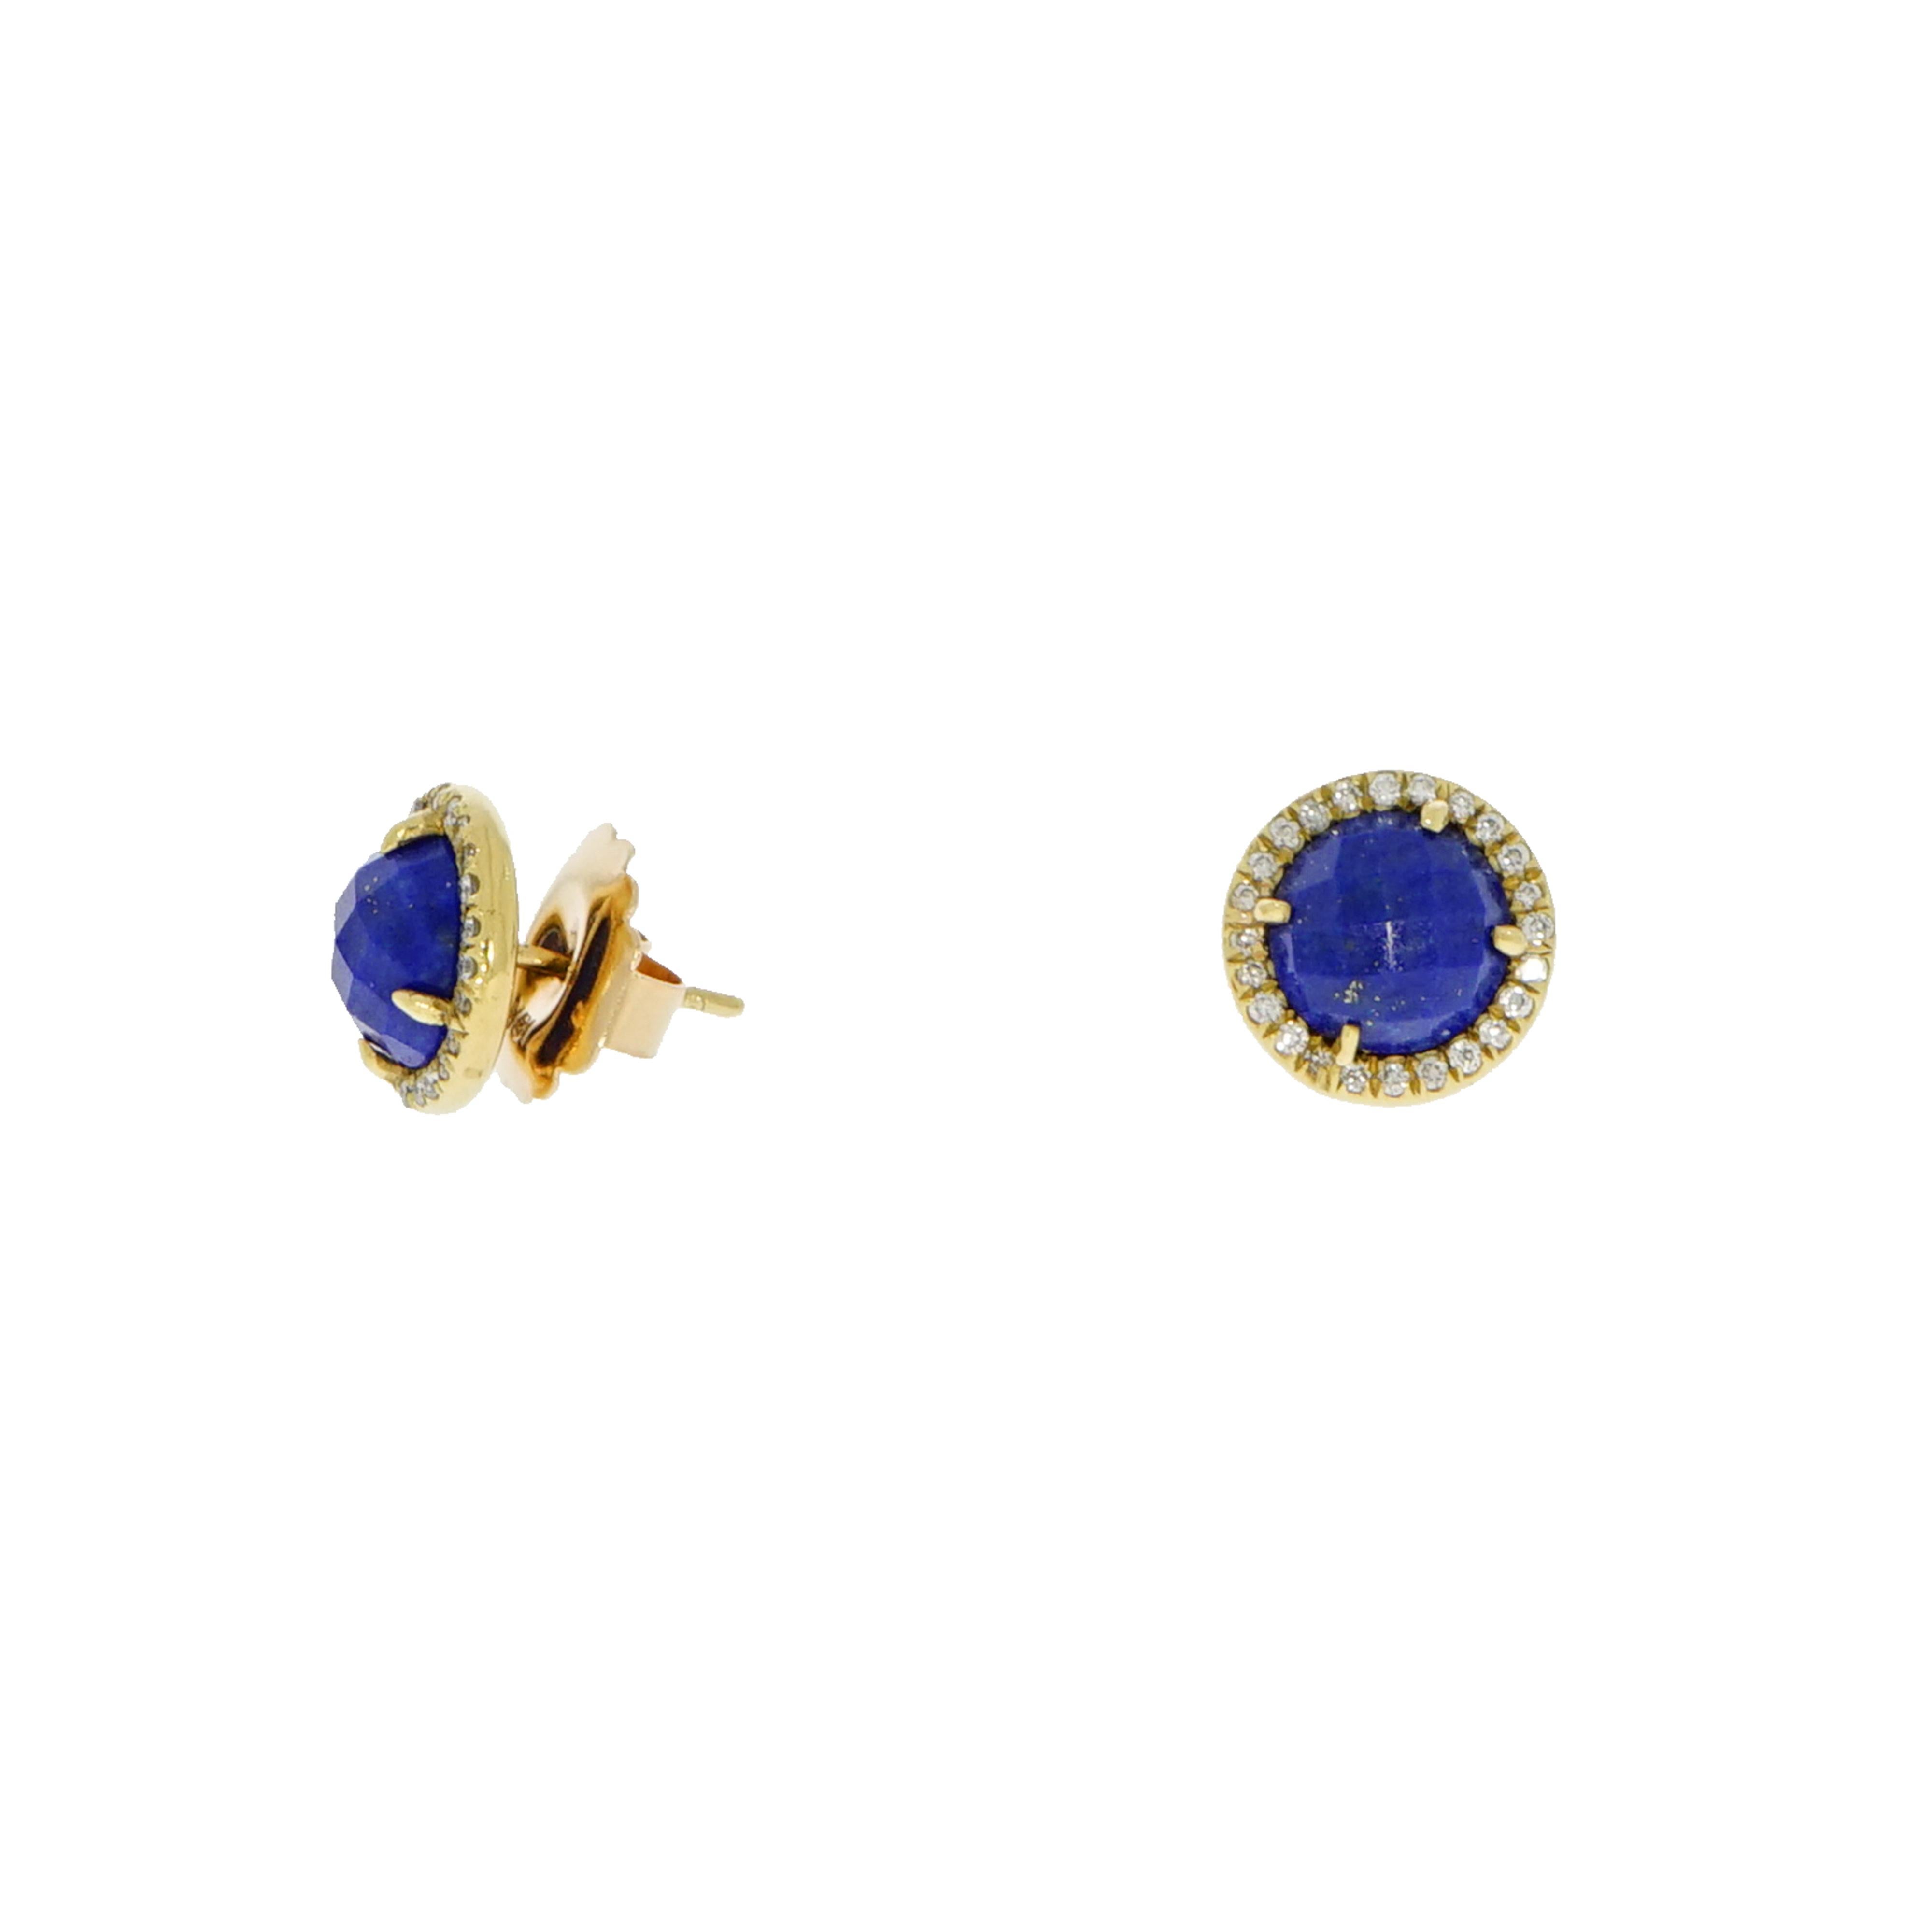 This style is the key to looking chic... Classic and simple with unique texture and sparkles.
Designed and crafted in NYC this beautiful Lapis Lazuli and Diamond Stud Earrings are set in 18k yellow gold with 2.95 carat Lapis Lazuli and 0.23 carat of